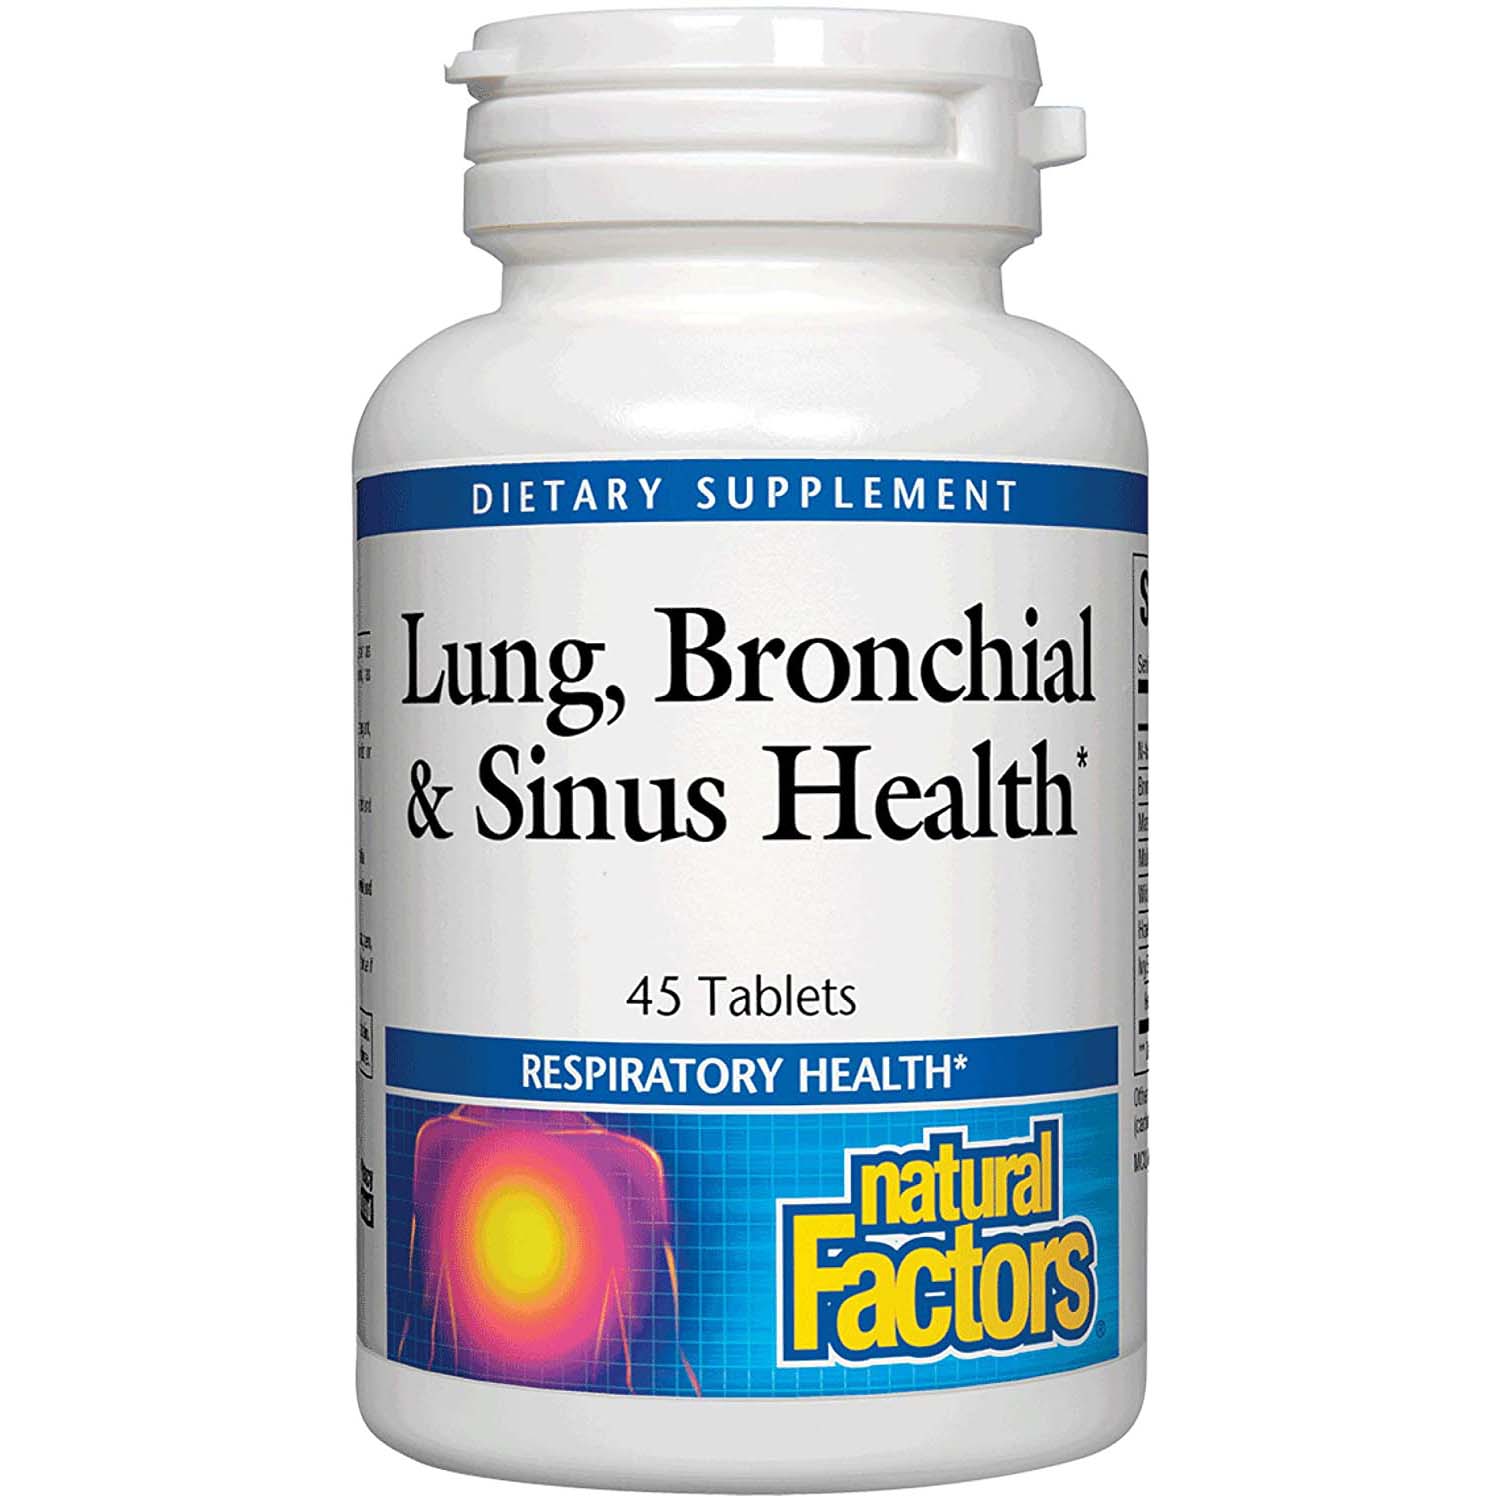 Natural Factors Lung, Bronchial & Sinus Health, 45 Tablets